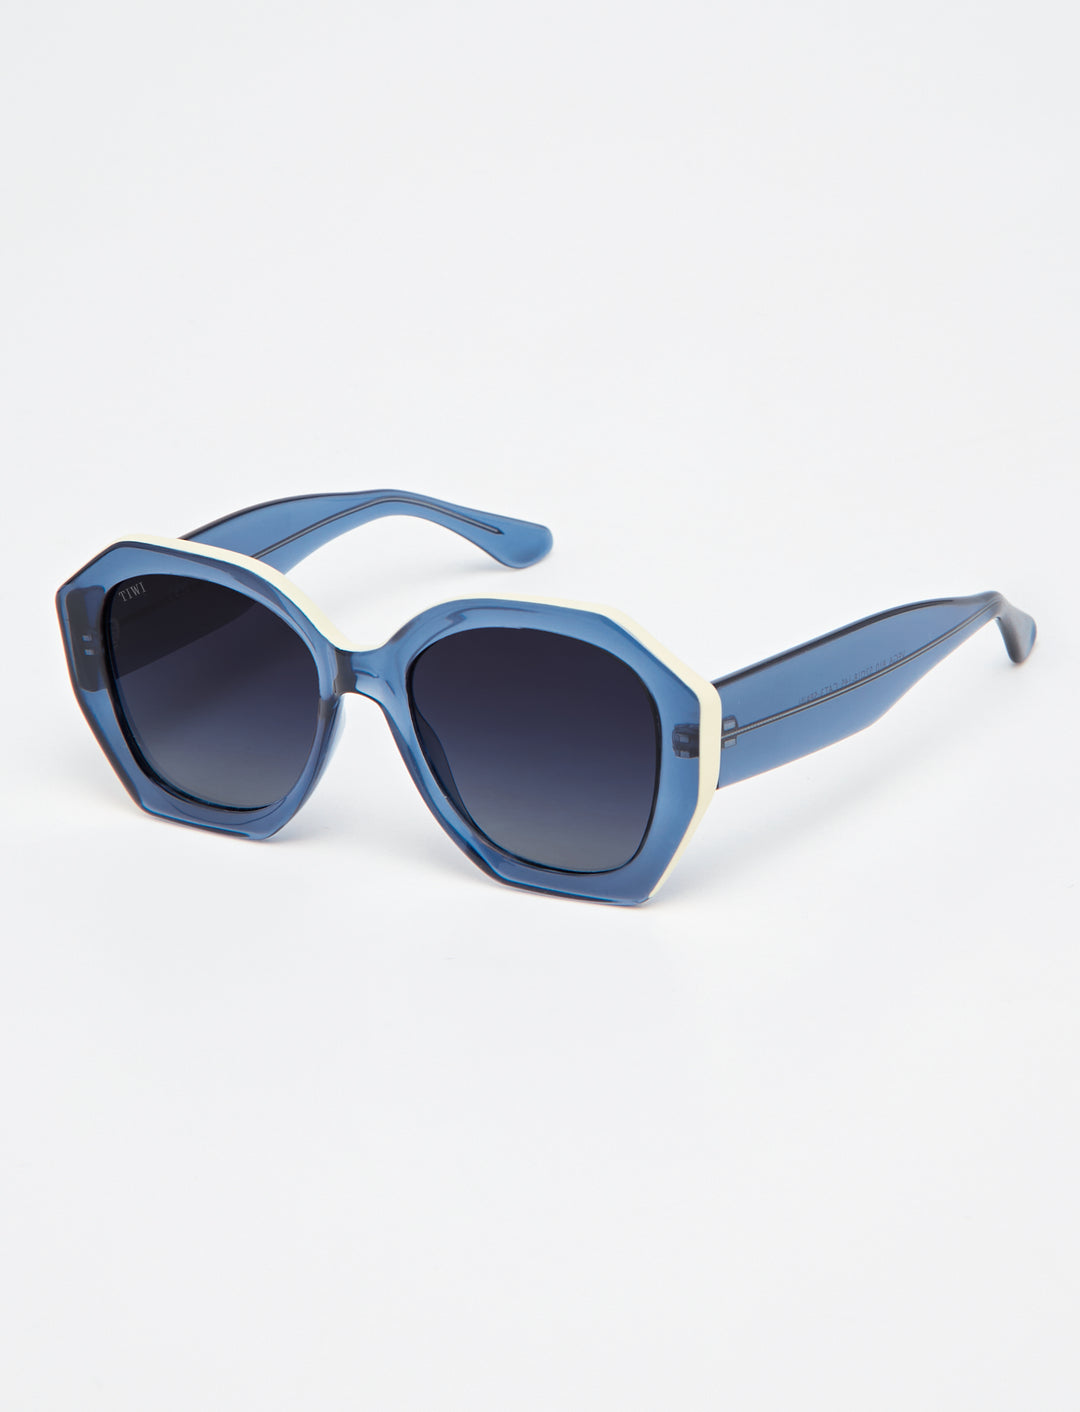 VEGA Sunglasses Available in more colors   